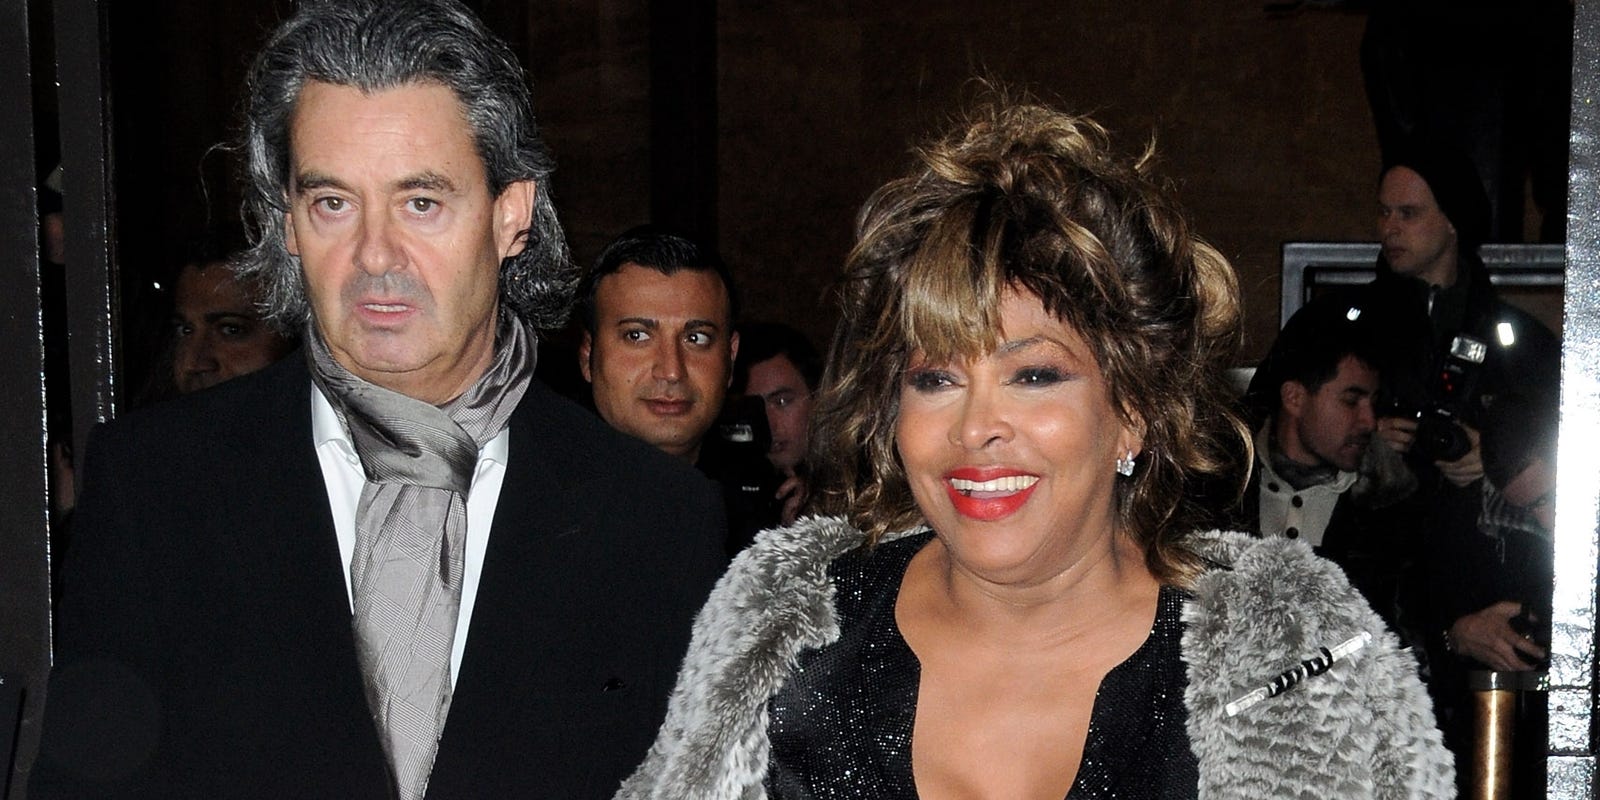 Tina Turner marries longtime beau in Zurich